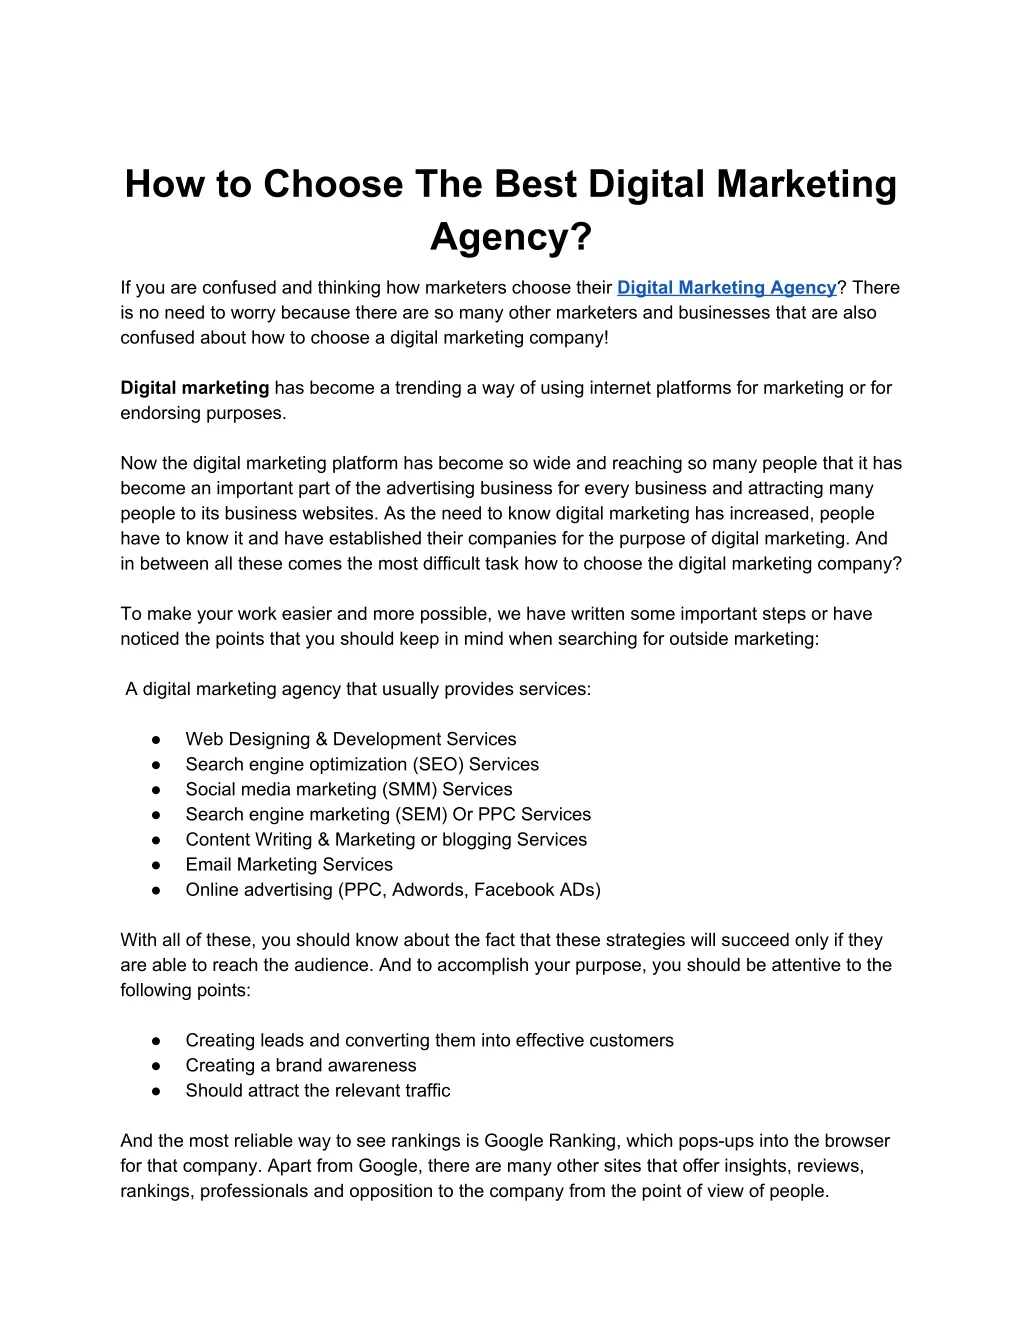 how to choose the best digital marketing agency